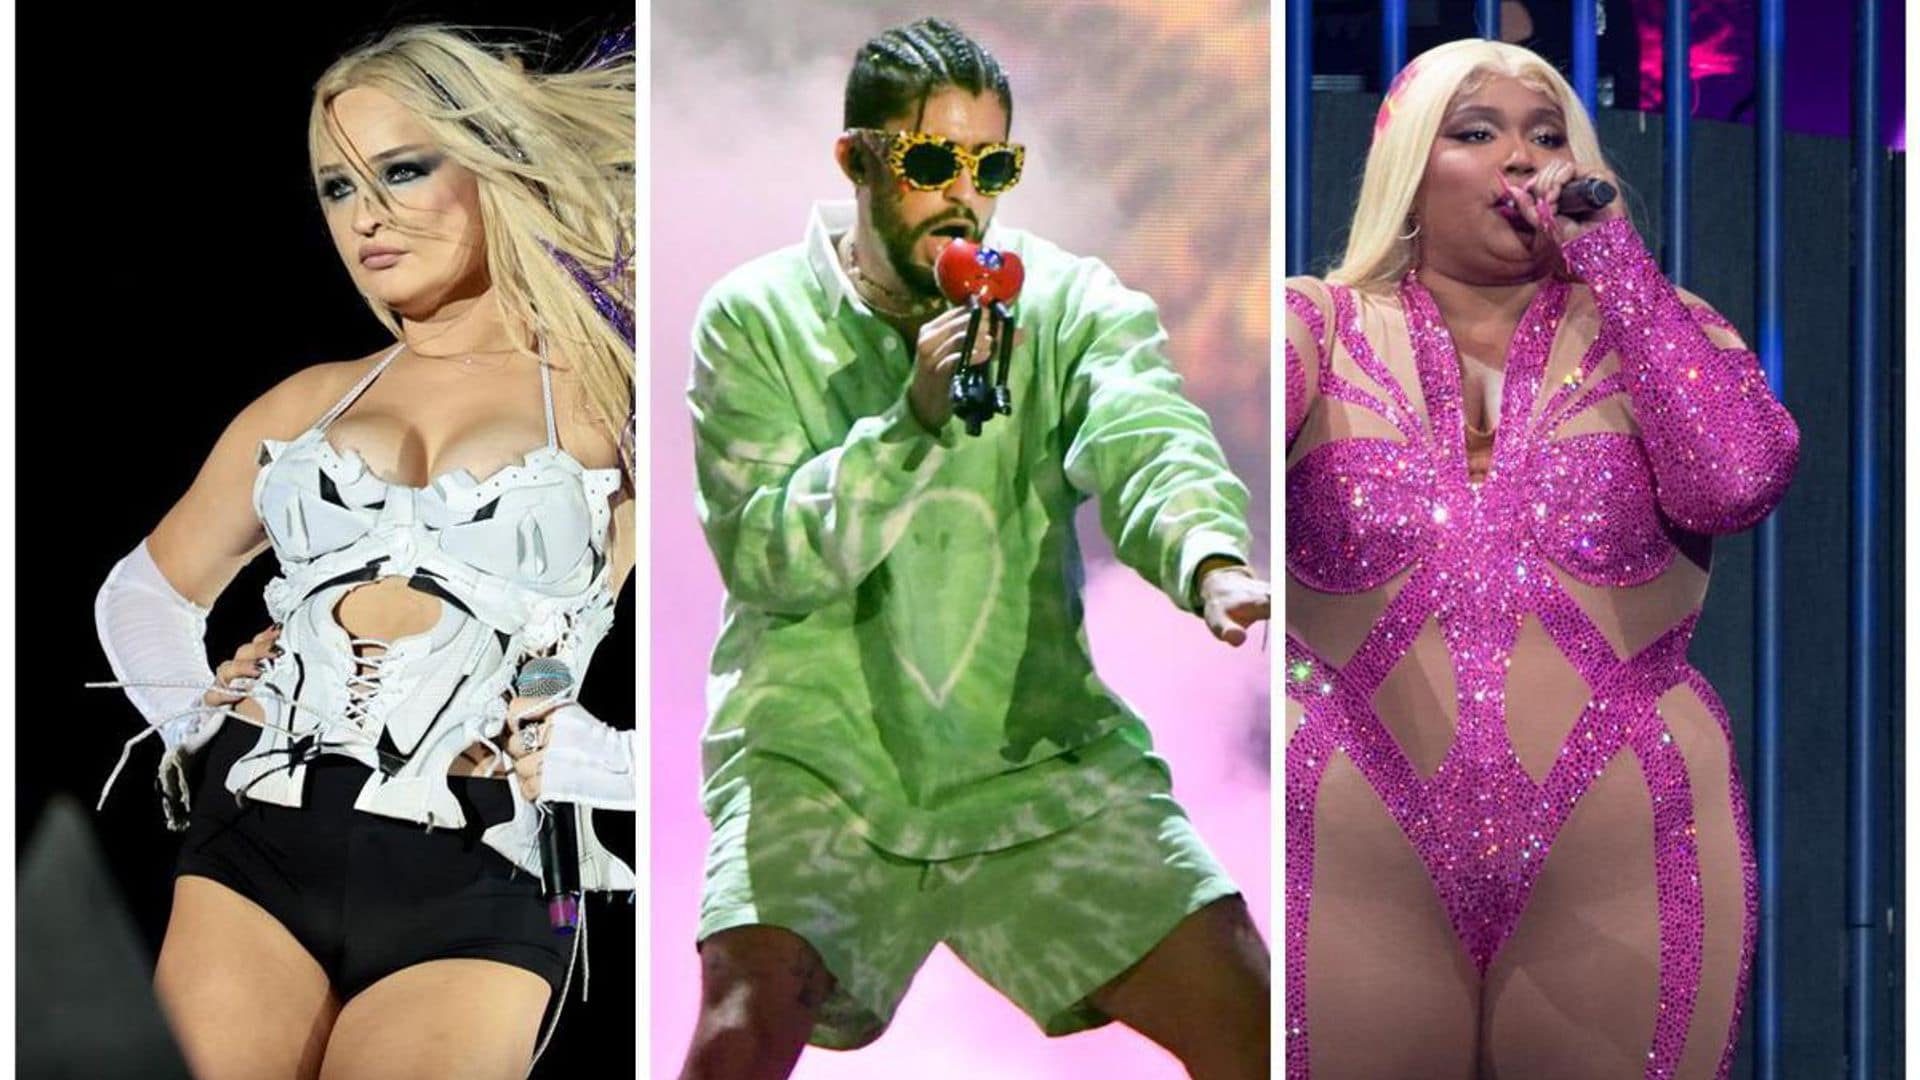 Grammy performers announced: Bad Bunny, Lizzo, Kim Petras, Sam Smith, and more